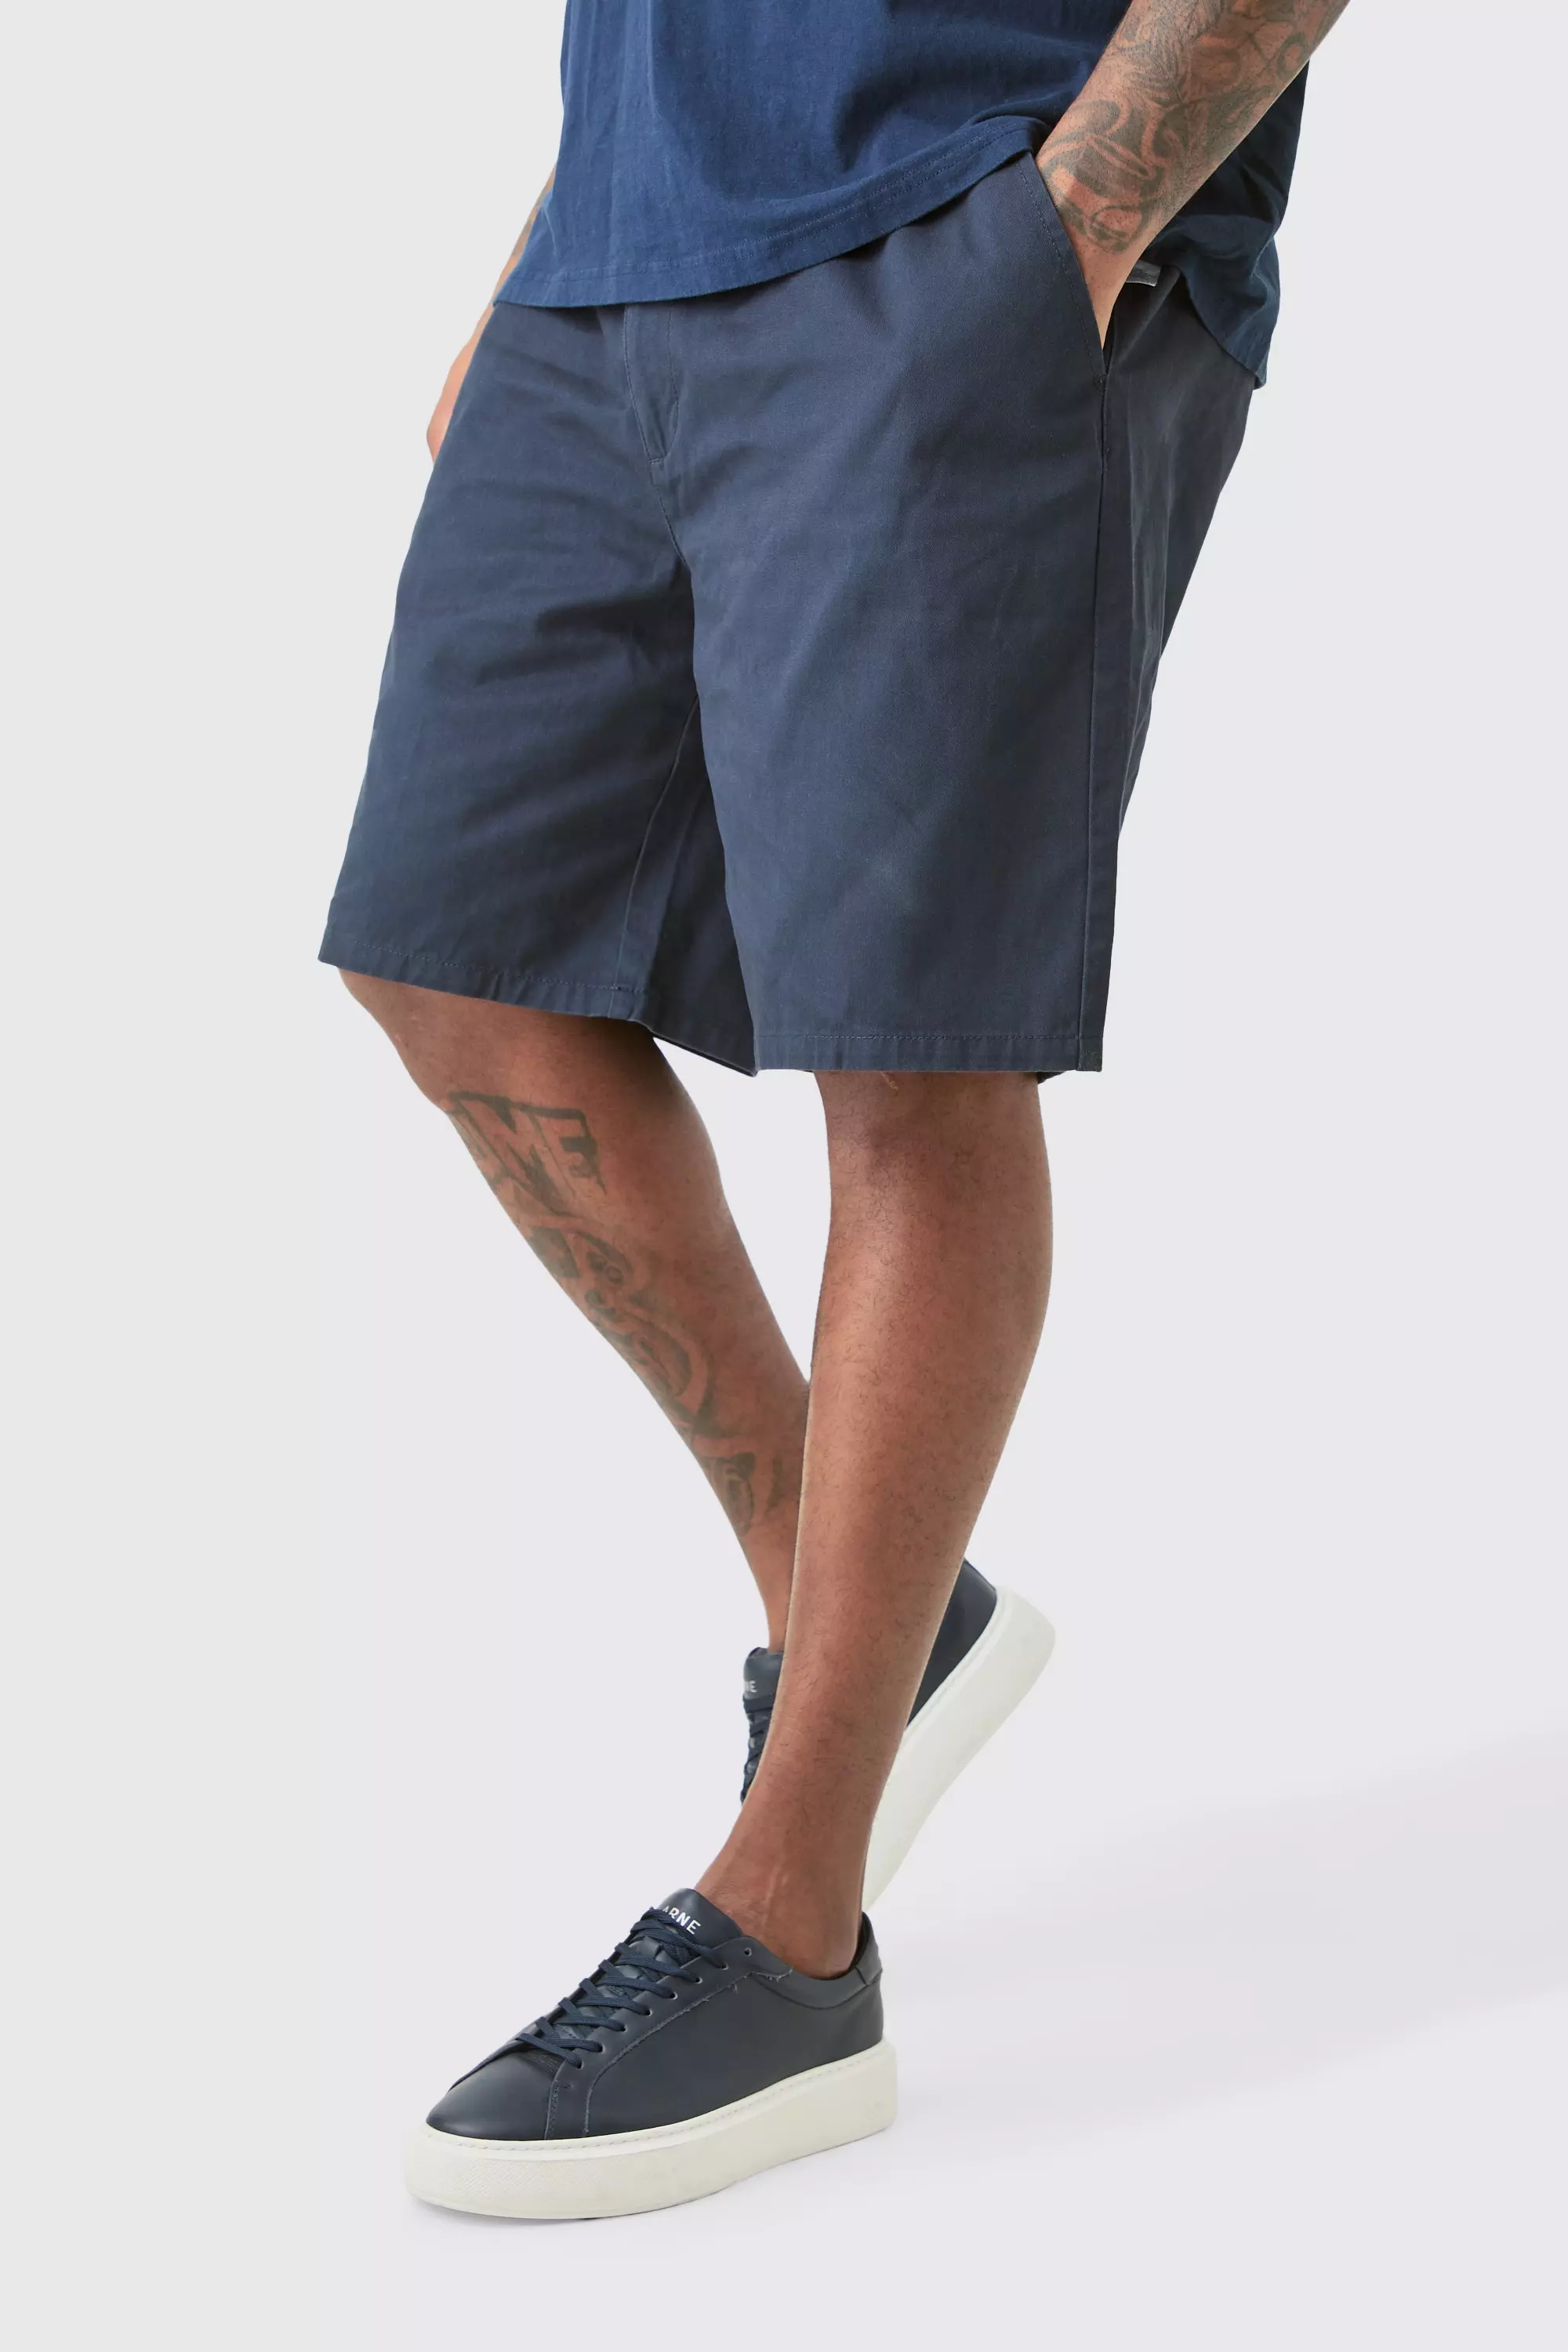 Plus Fixed Waist Navy Relaxed Fit Shorts Navy